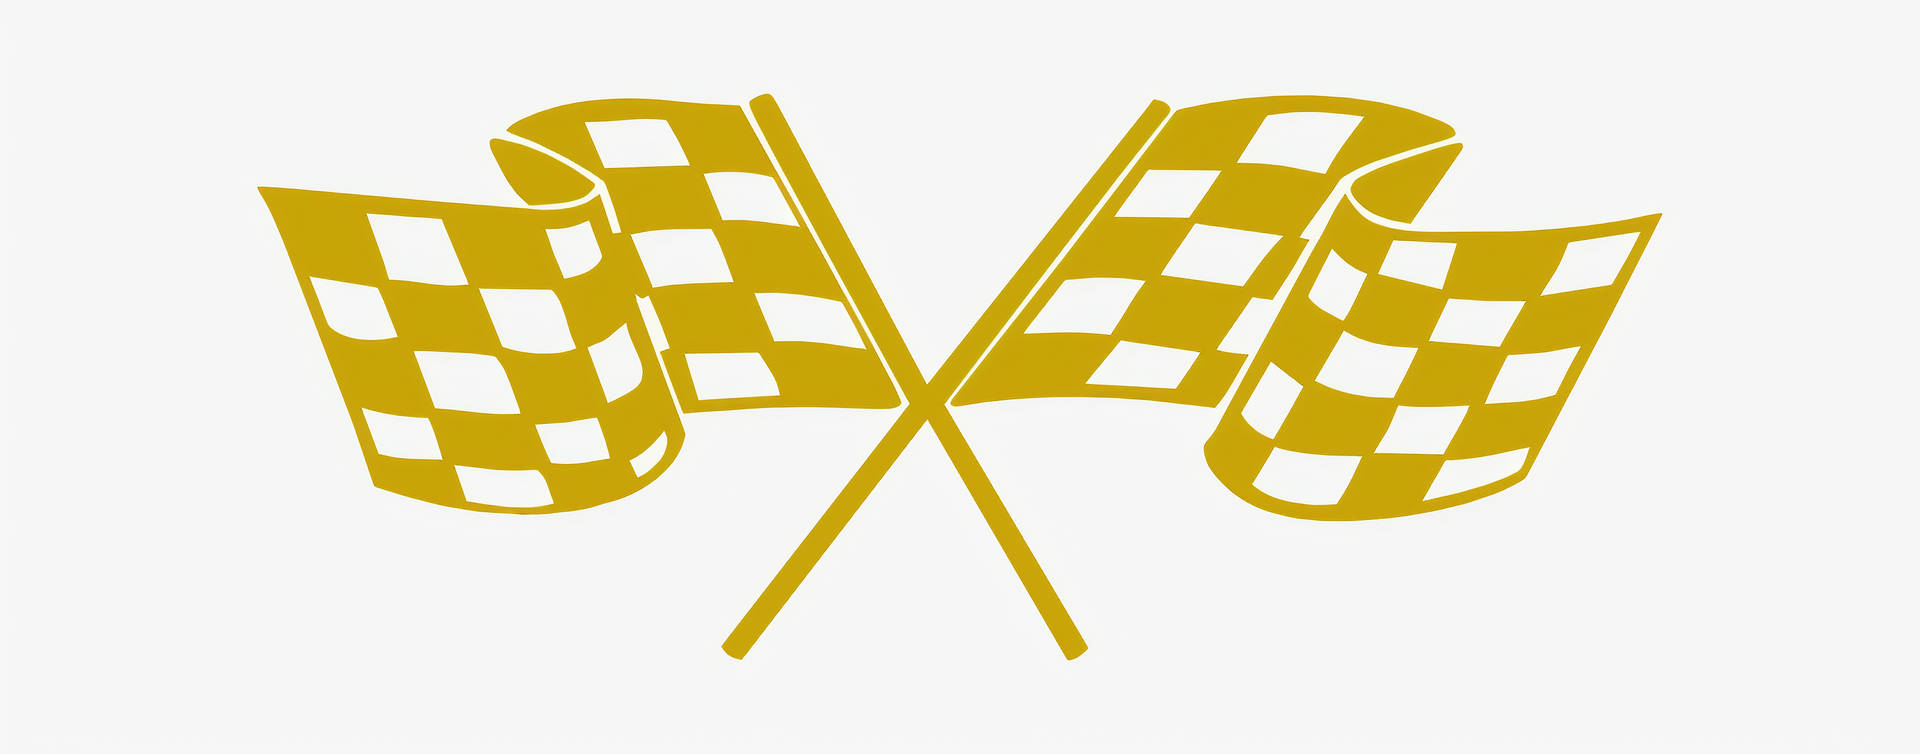 Gold Checkered Flags Background